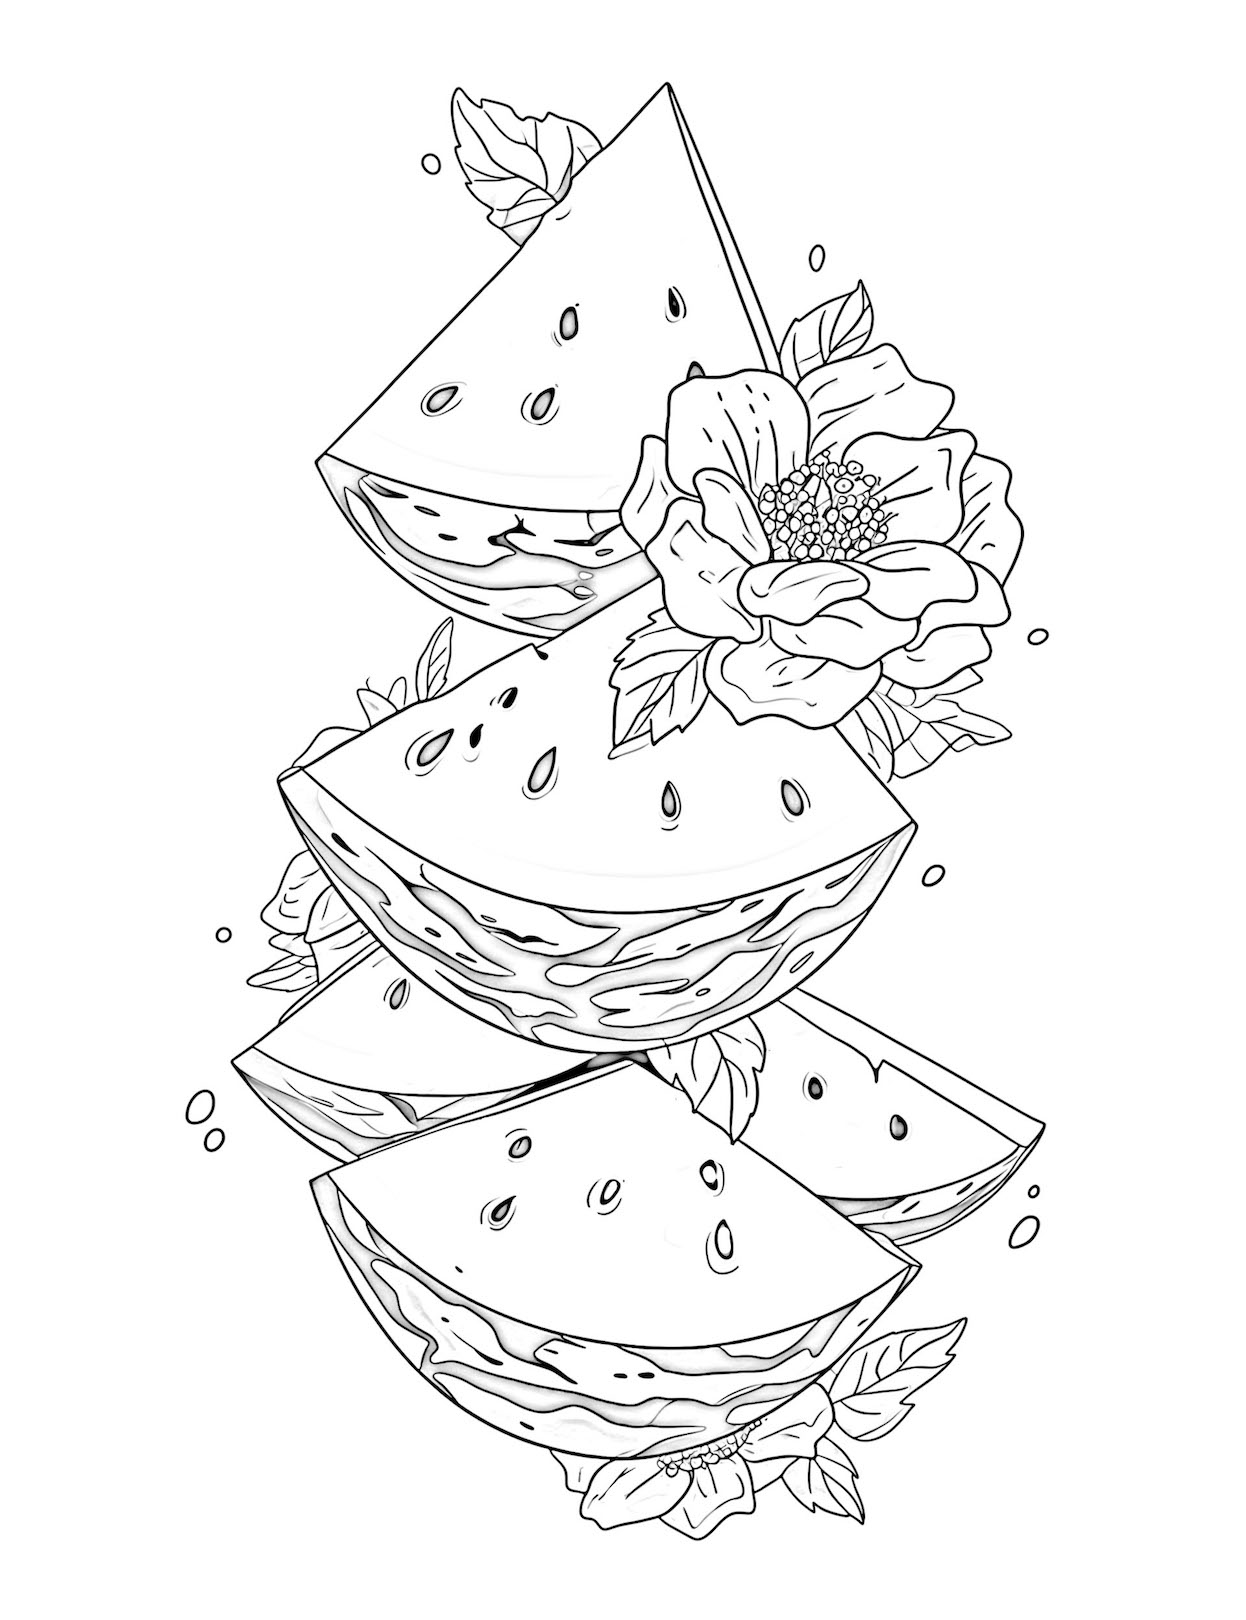 Incredible watermelon coloring pages